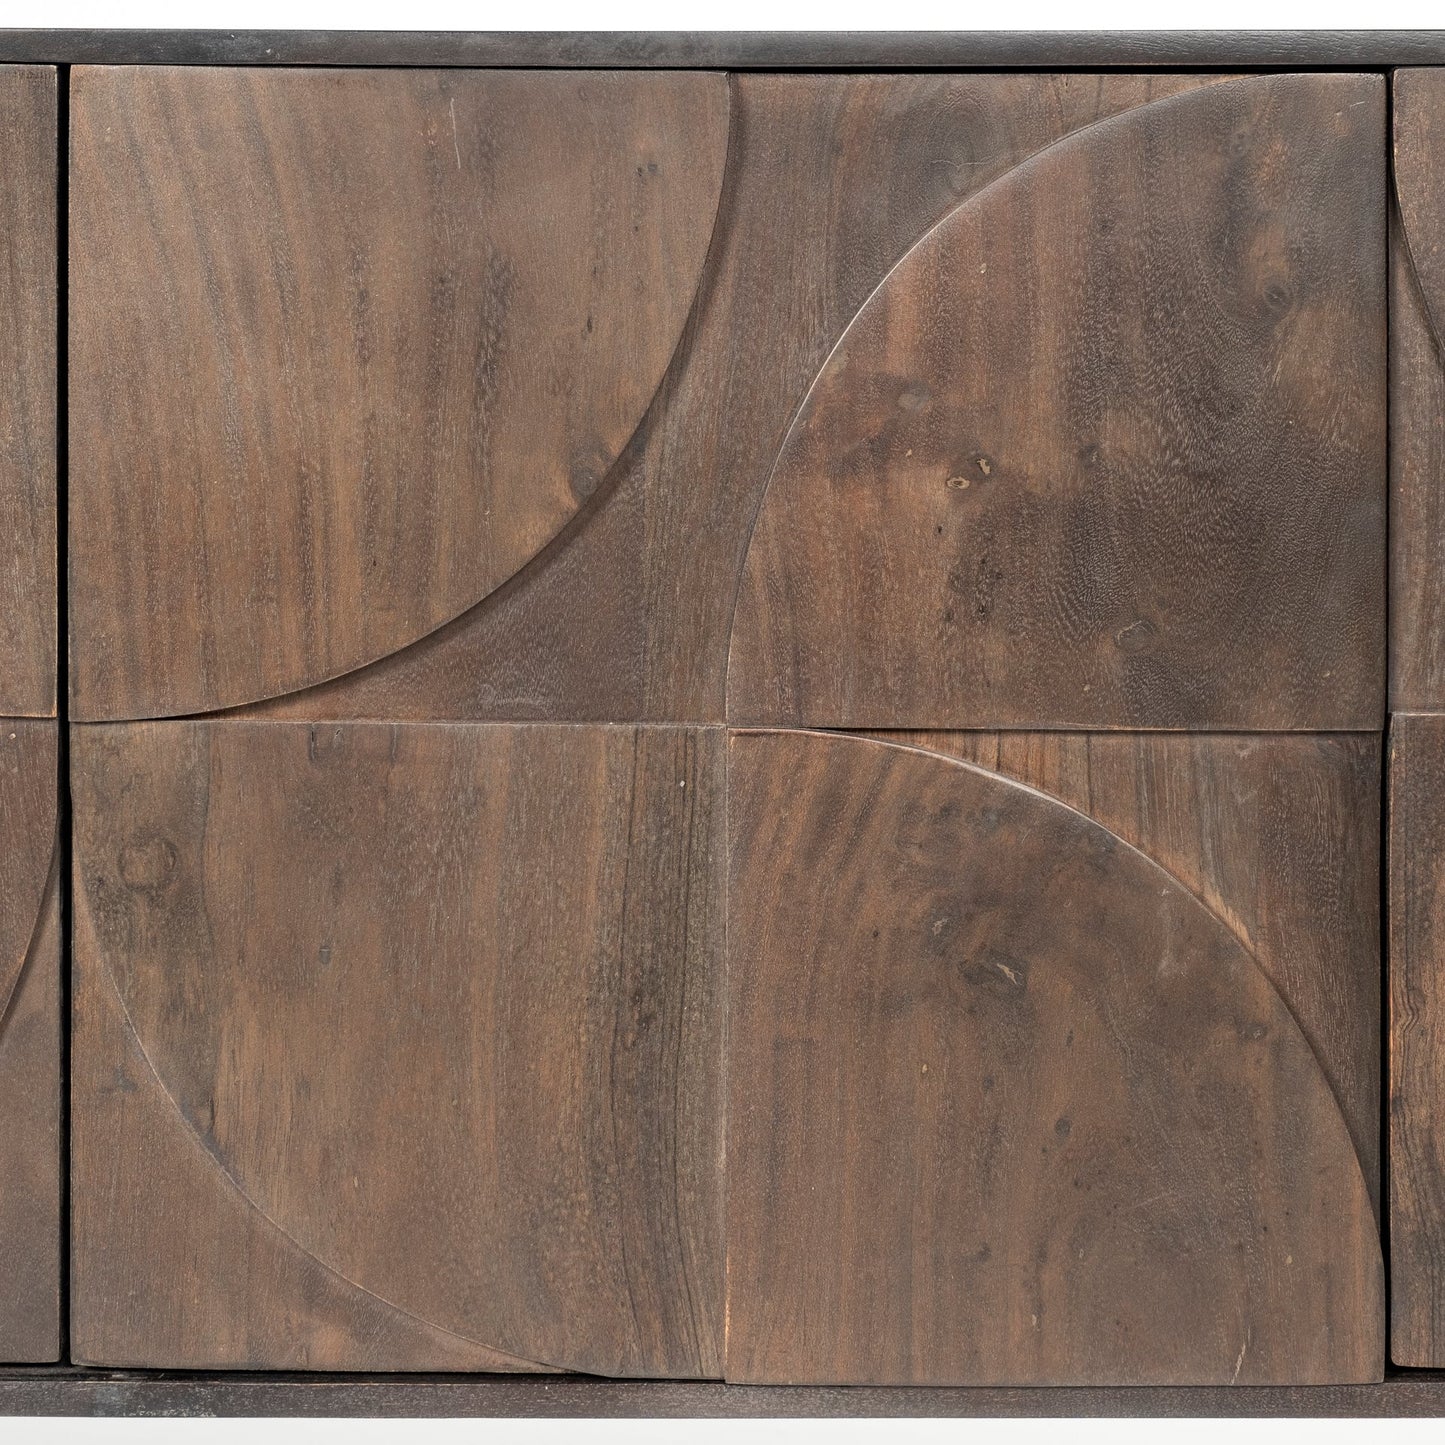 Brown Solid Mango Wood Finish Sideboard With 4 Cabinet Doors